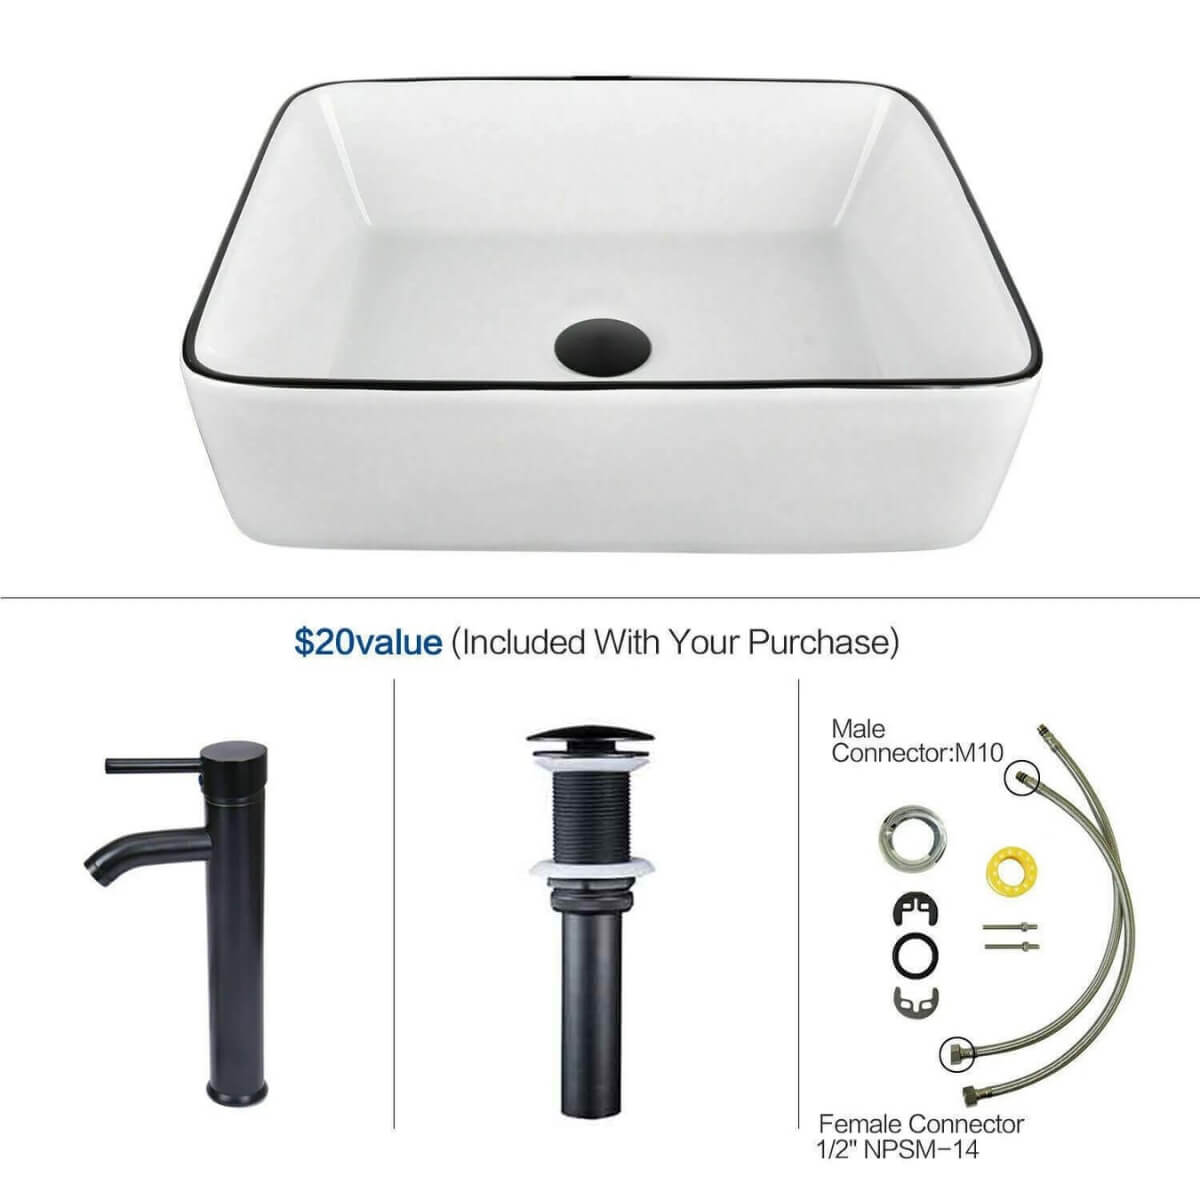 Elecwish white rectangular ceramic vessel sink set includes faucet, drainer and small accessories